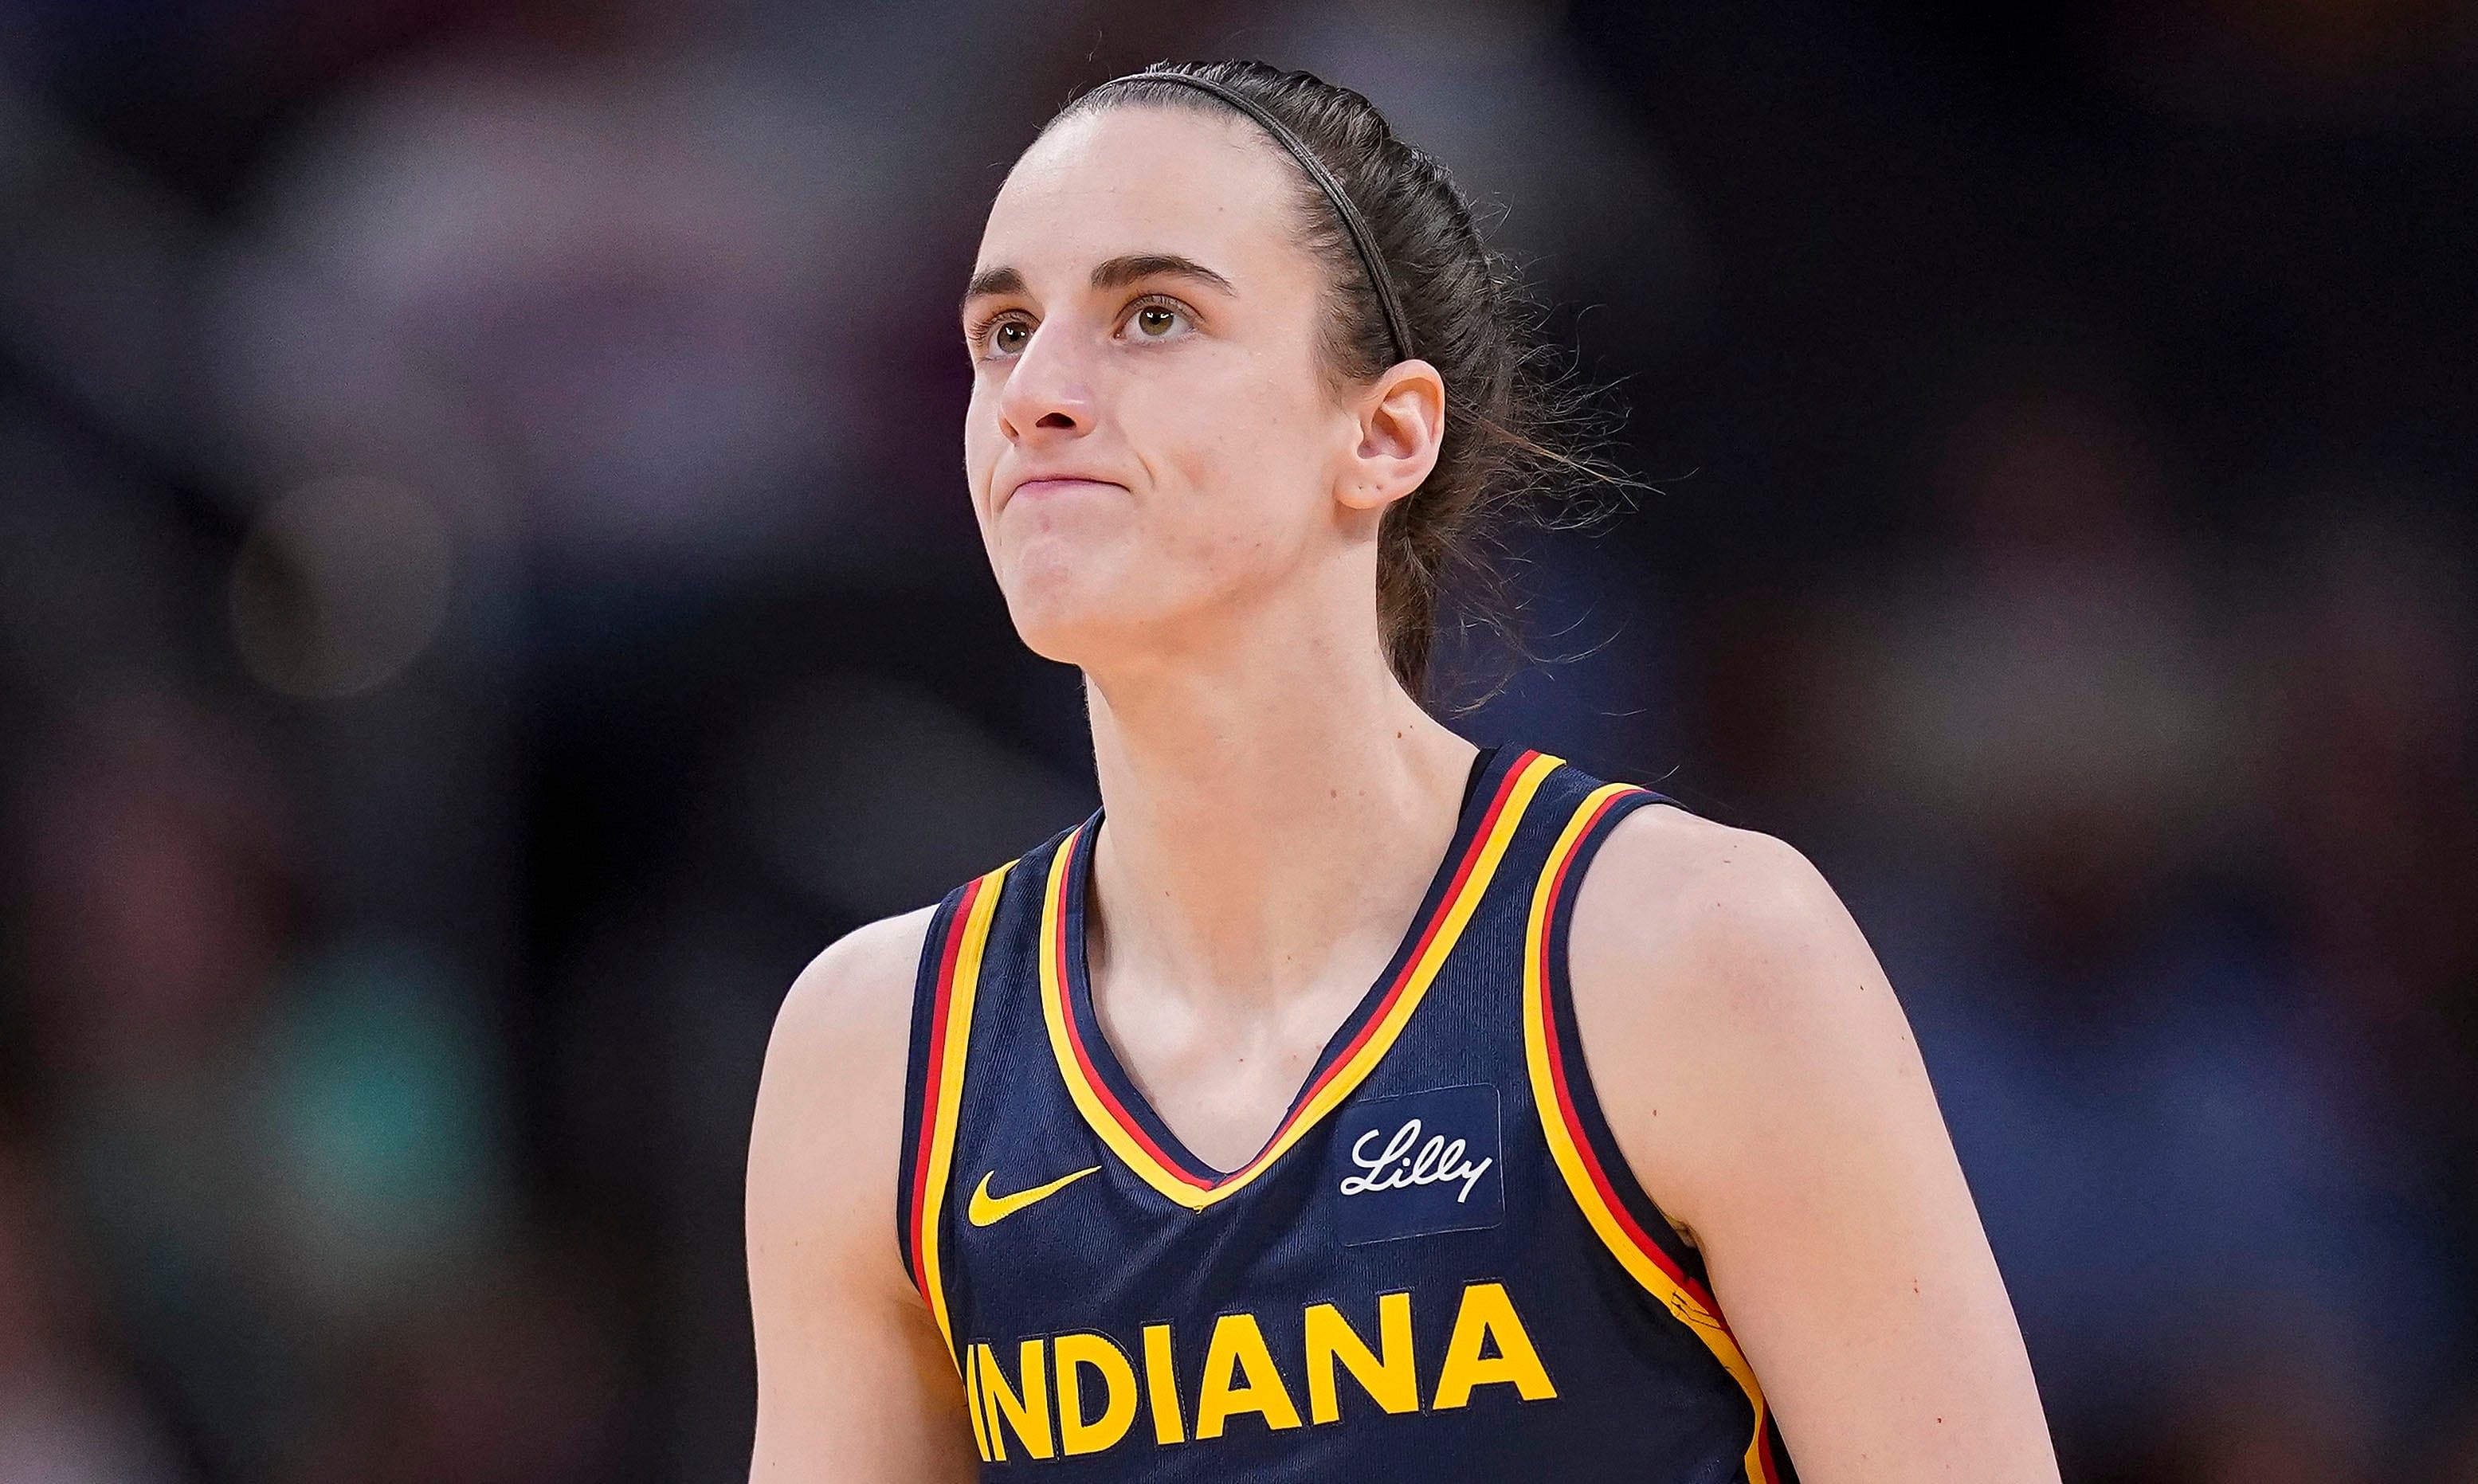 Caitlin Clark's arrival boosts WNBA attendance as Indiana Fever's game